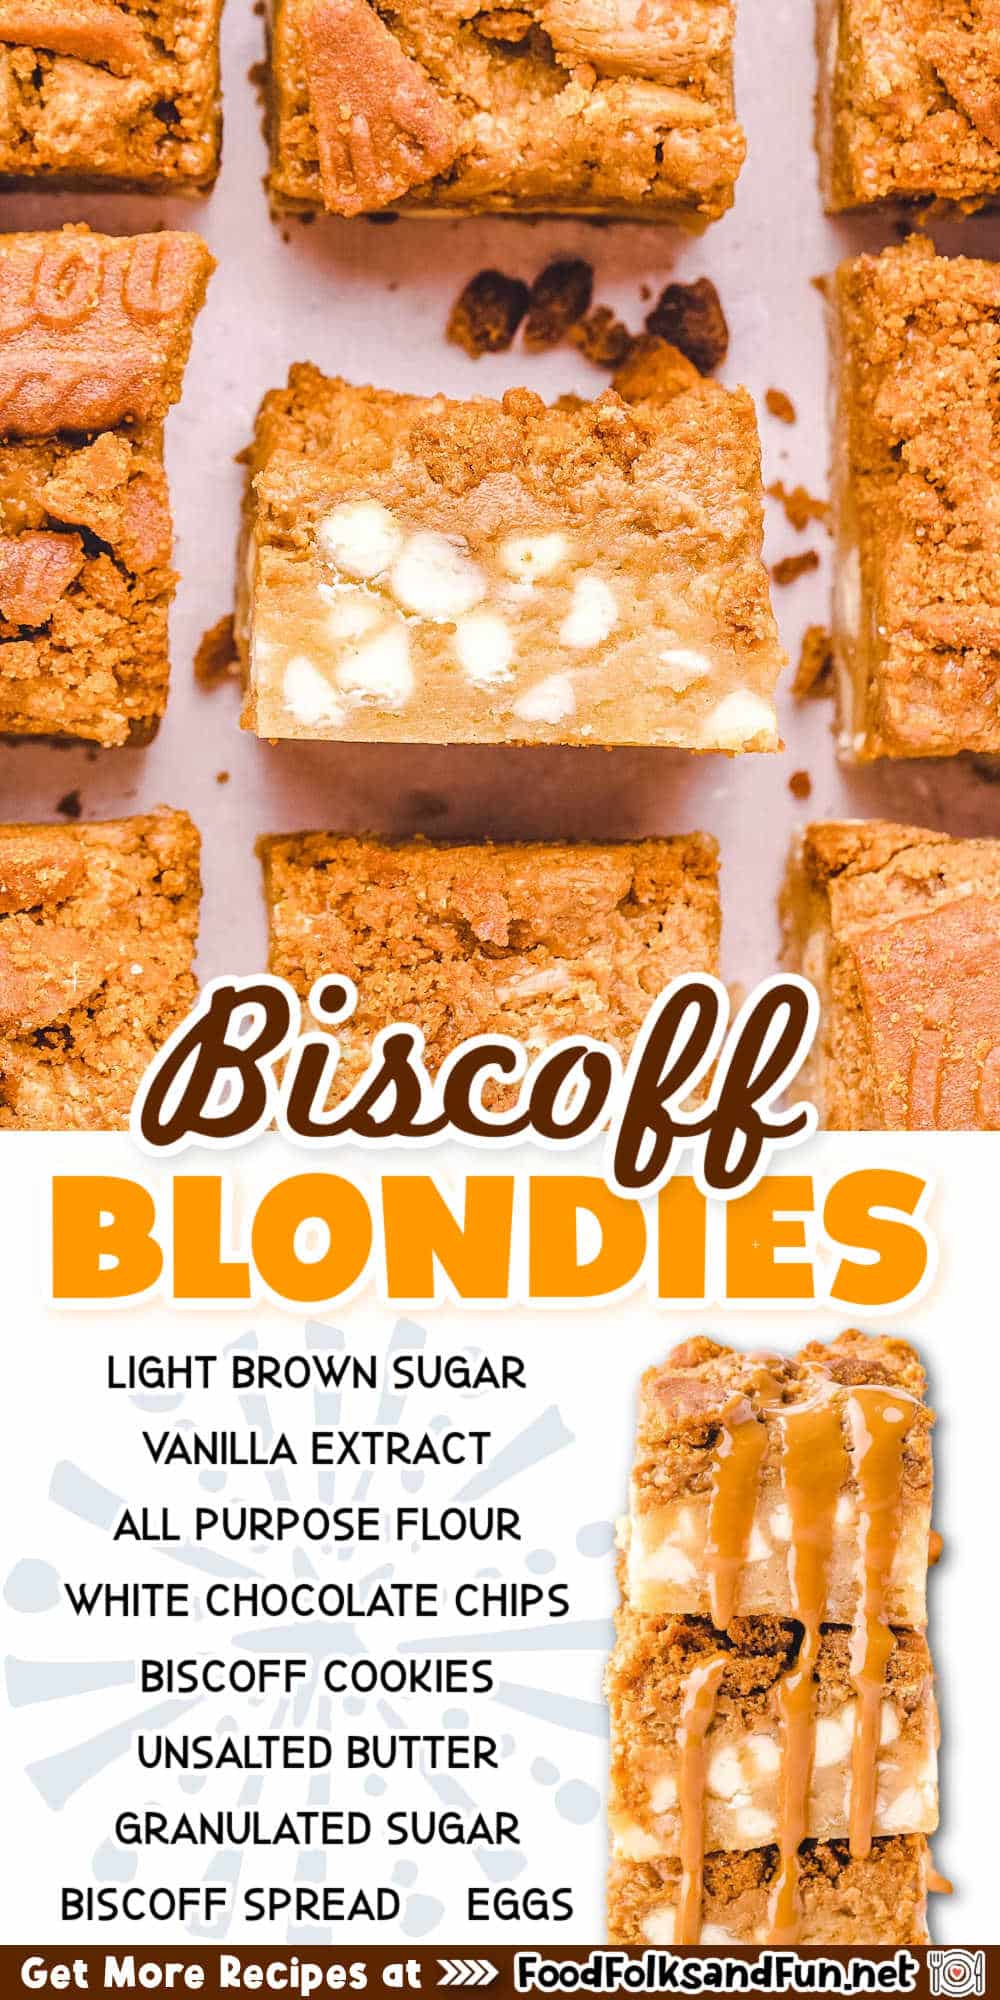 Treat yourself to these divine Biscoff Blondies! Gooey blondie batter, white chocolate chips, and crumbled Biscoff cookies topped with warm Biscoff spread. via @foodfolksandfun